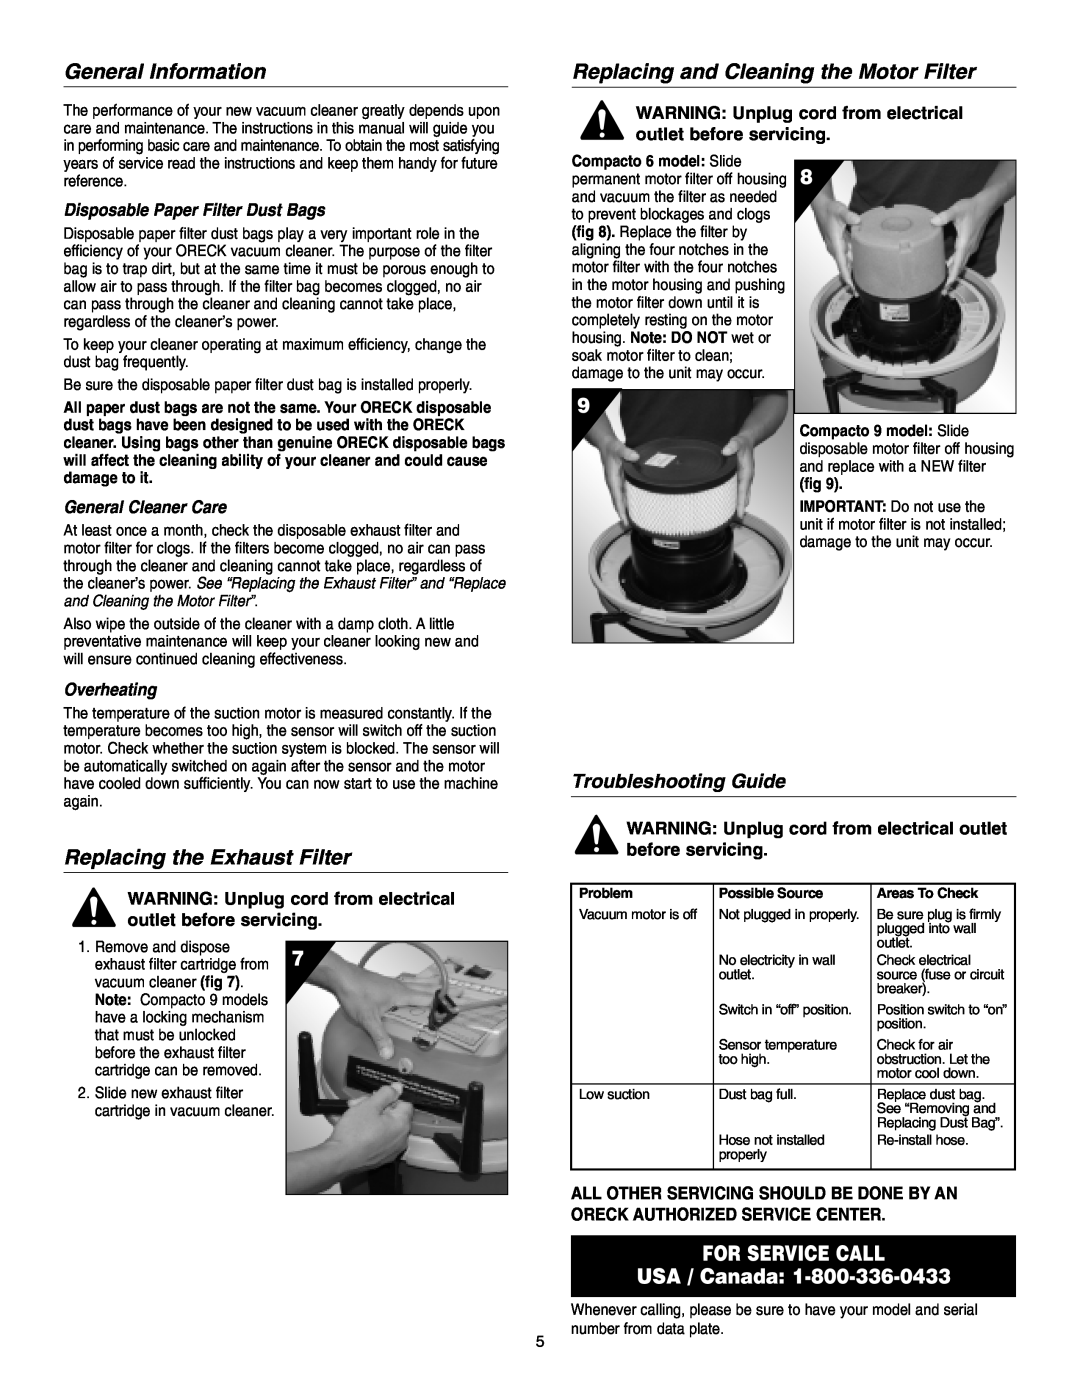 Oreck 6 General Information, Replacing and Cleaning the Motor Filter, Replacing the Exhaust Filter, Troubleshooting Guide 